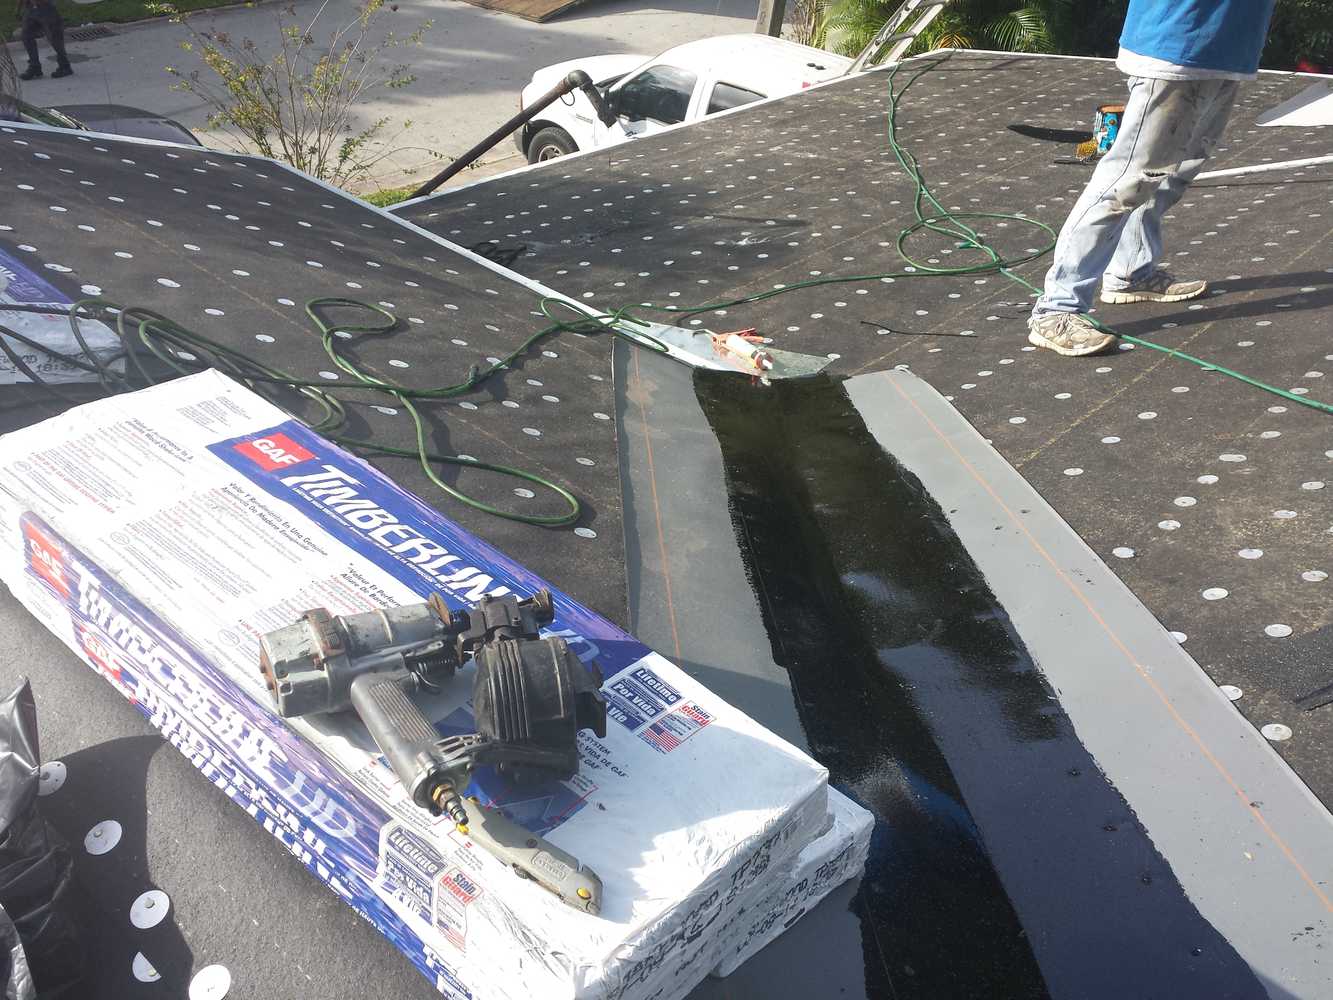 GAF system shingle roof in Coral Gables/Coconut Grove